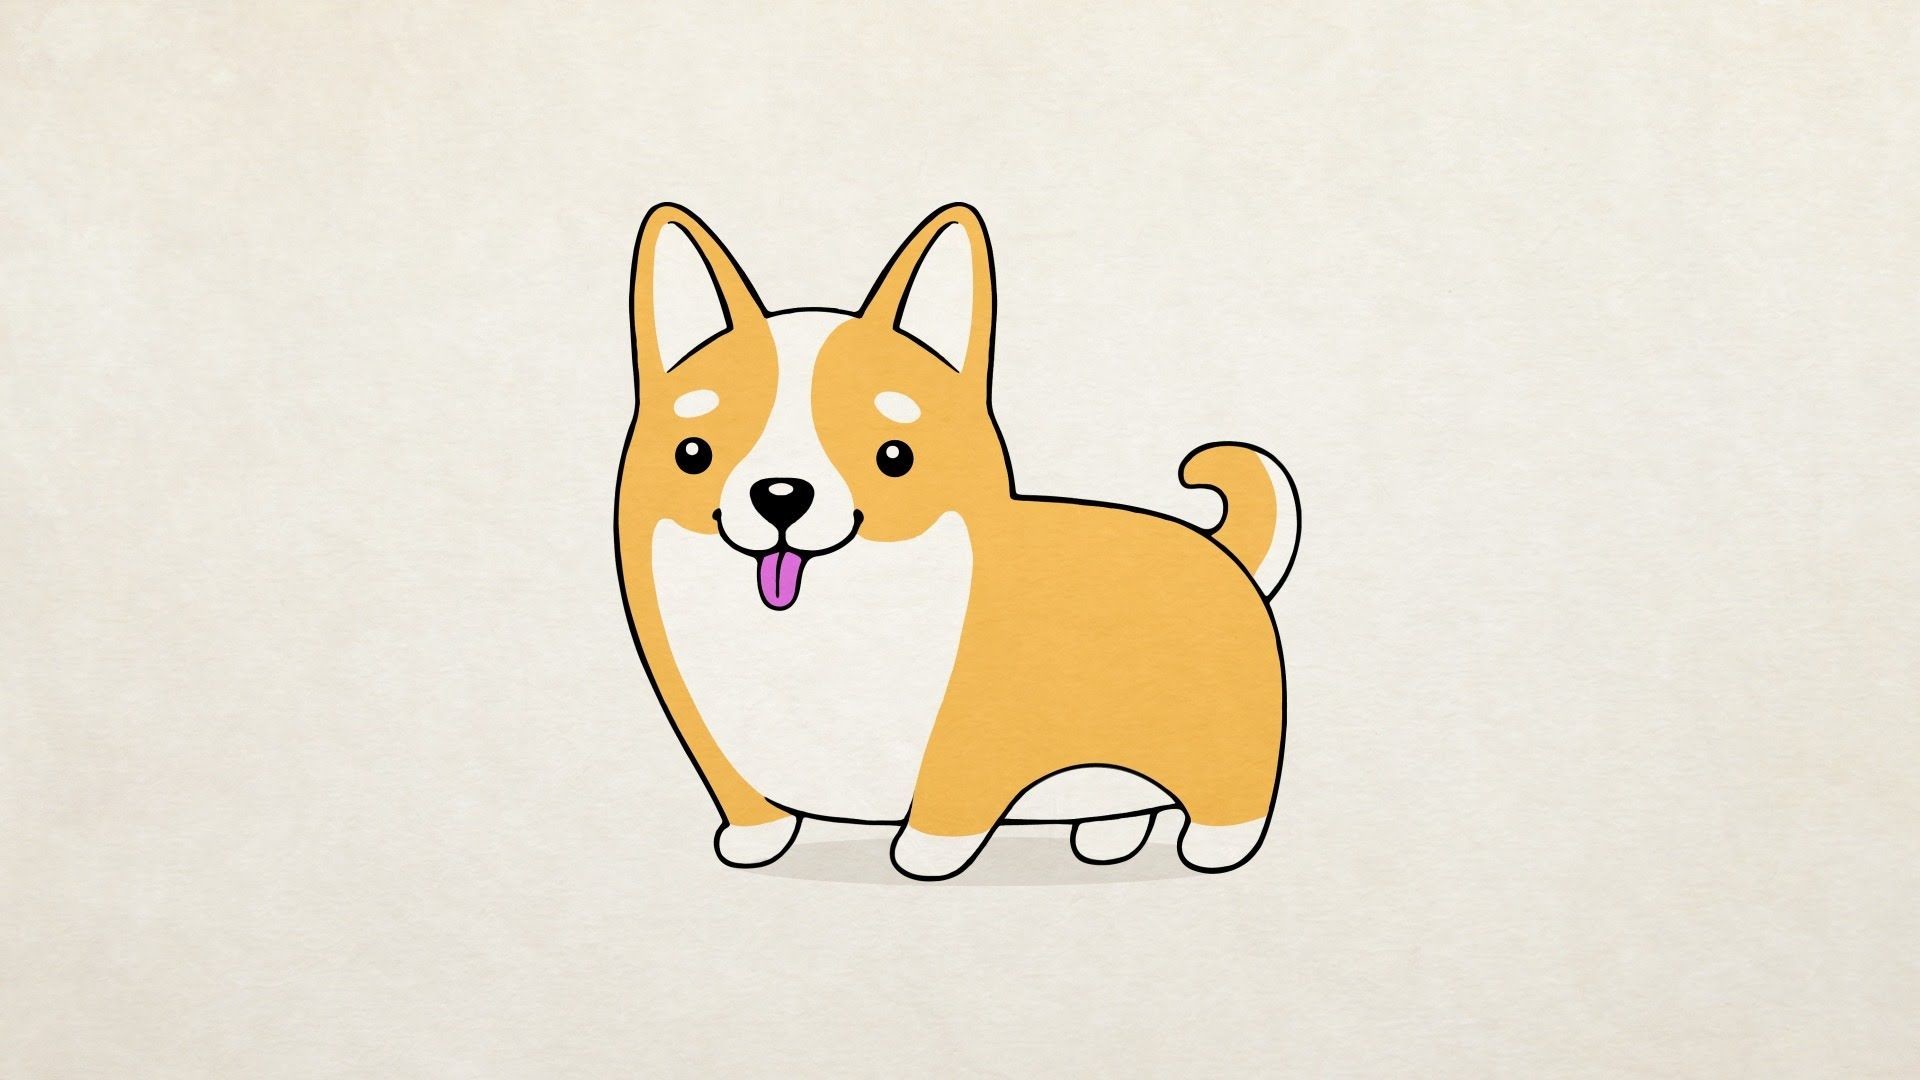 1920x1080  Dog Cute Drawing at GetDrawings.com | Free for personal use Dog  Cute .